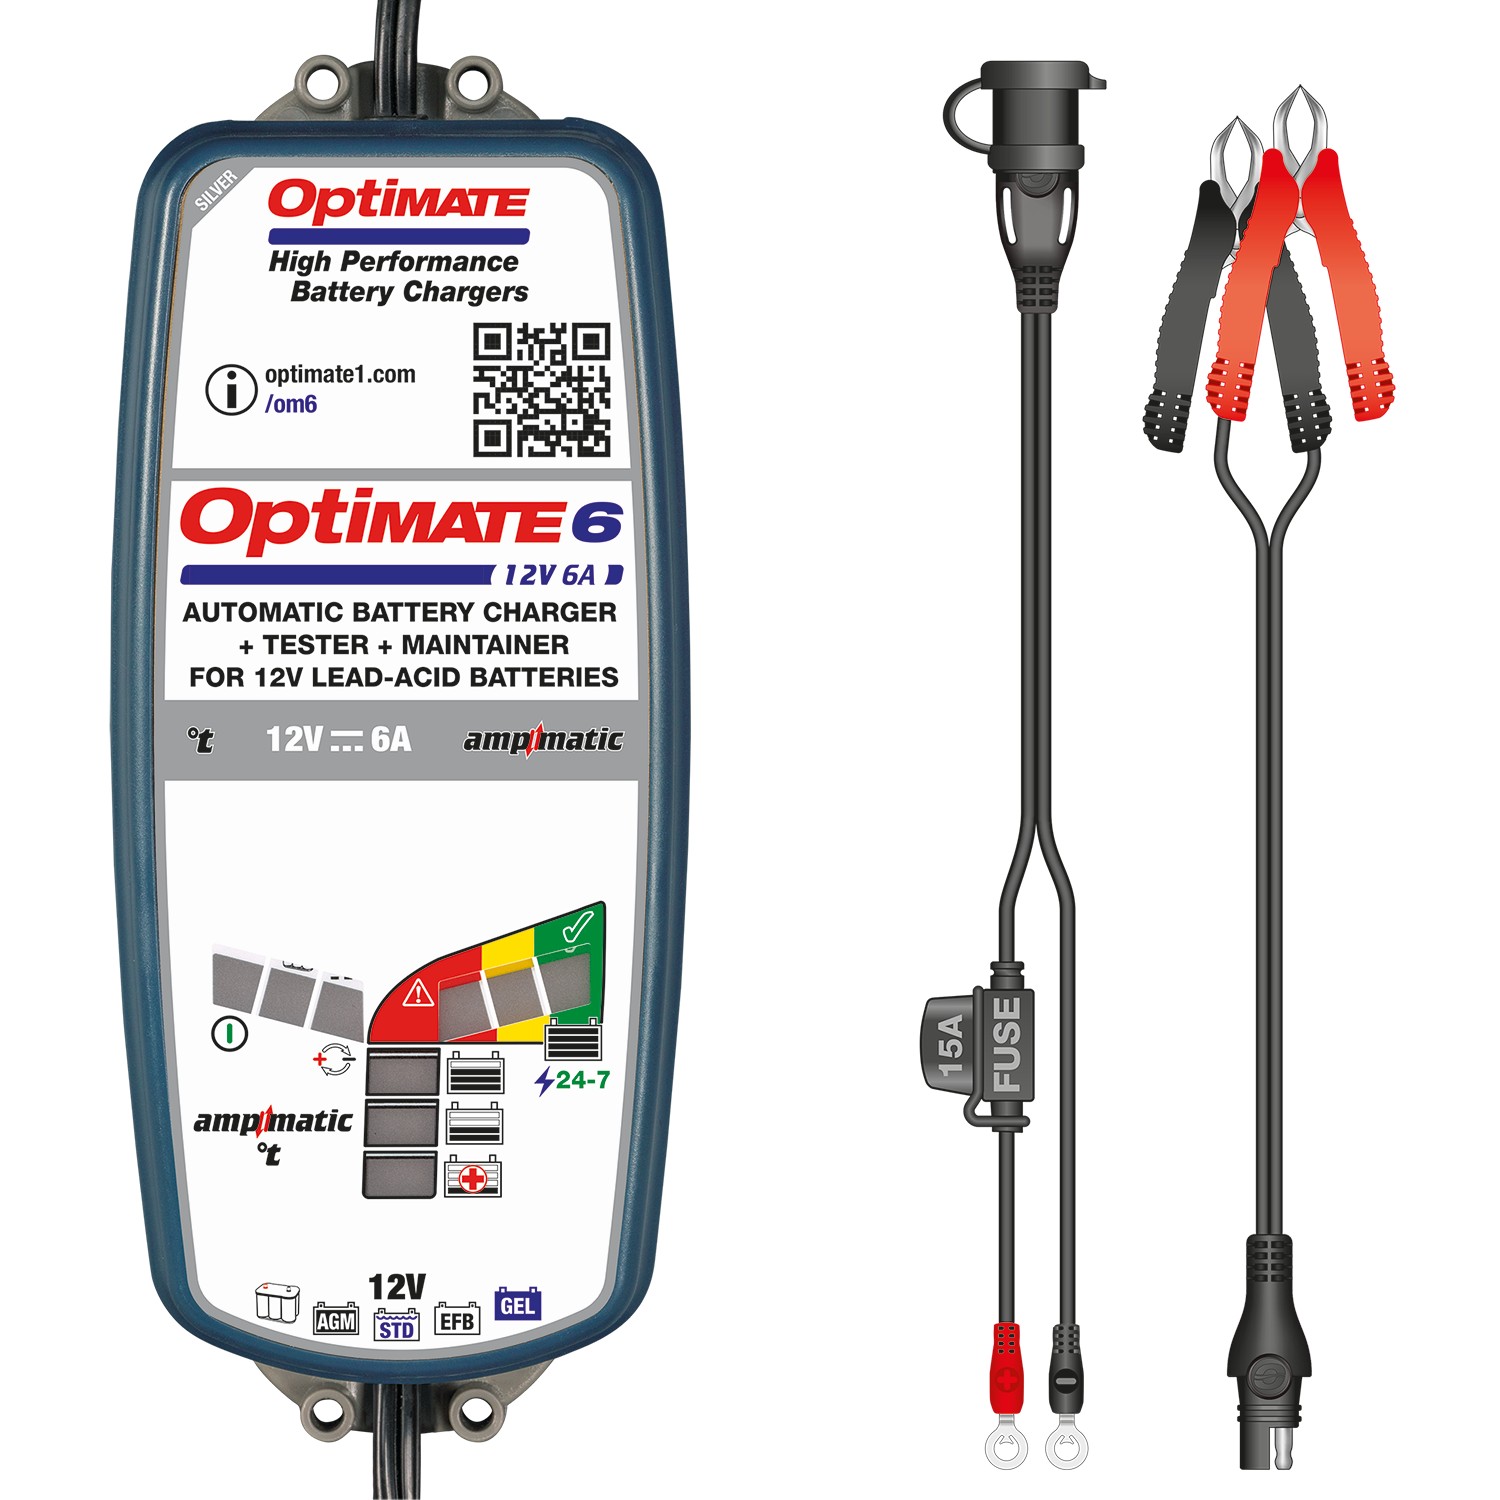 Fully Automatic Milenco Optimate 6-12 Volt Leisure Battery Charger 